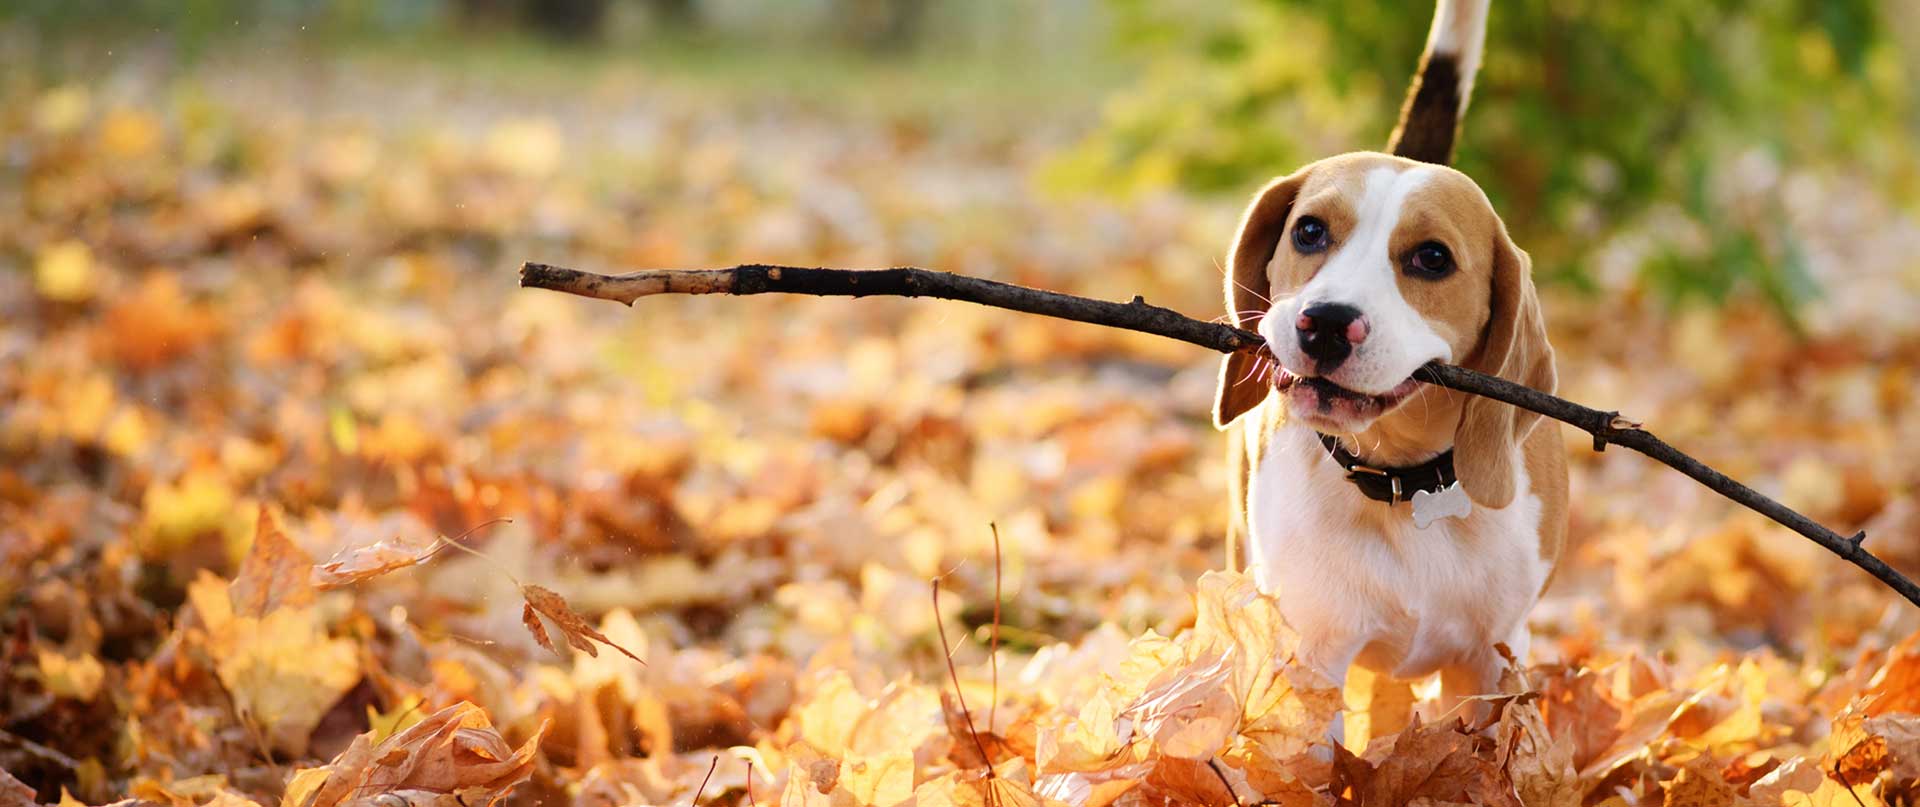 Dog with stick during autumn